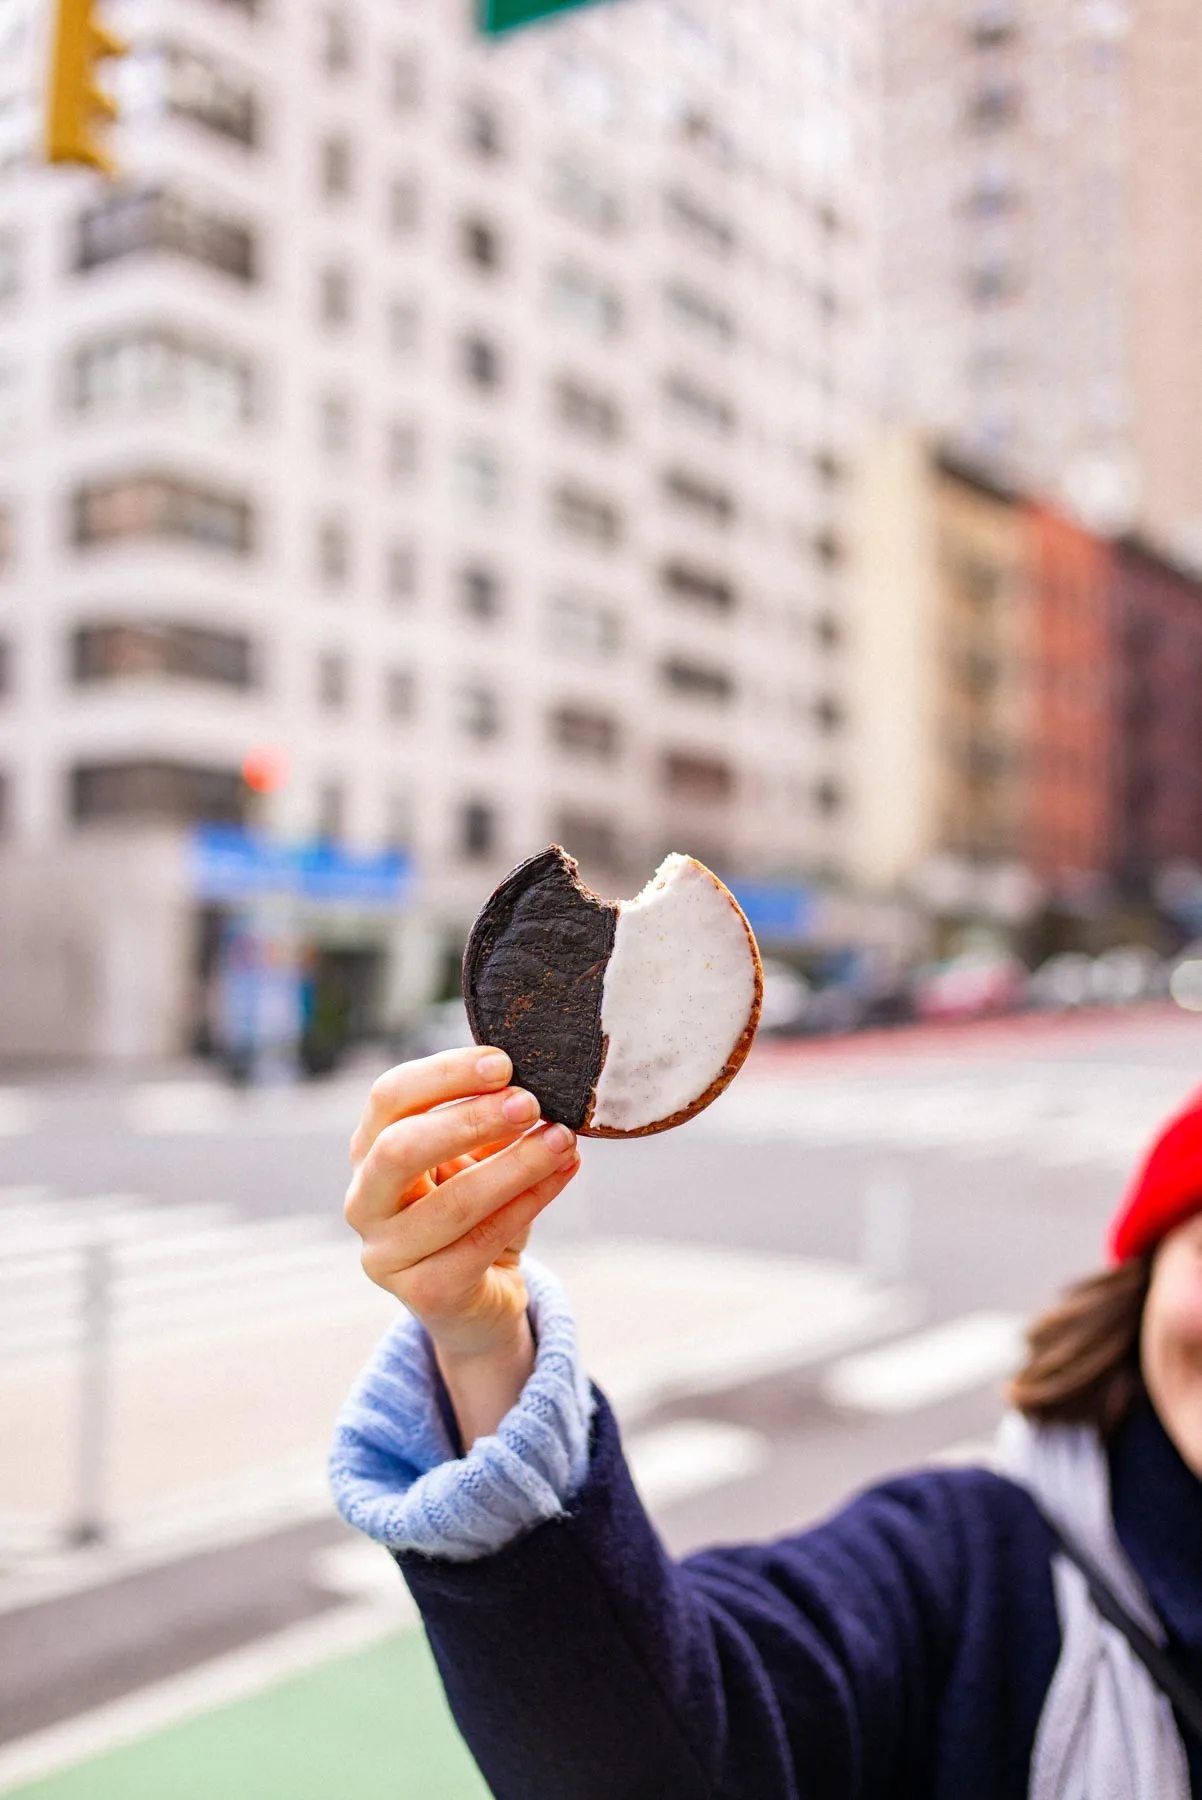 Black and white cookies at Breads Bakery Upper East Side